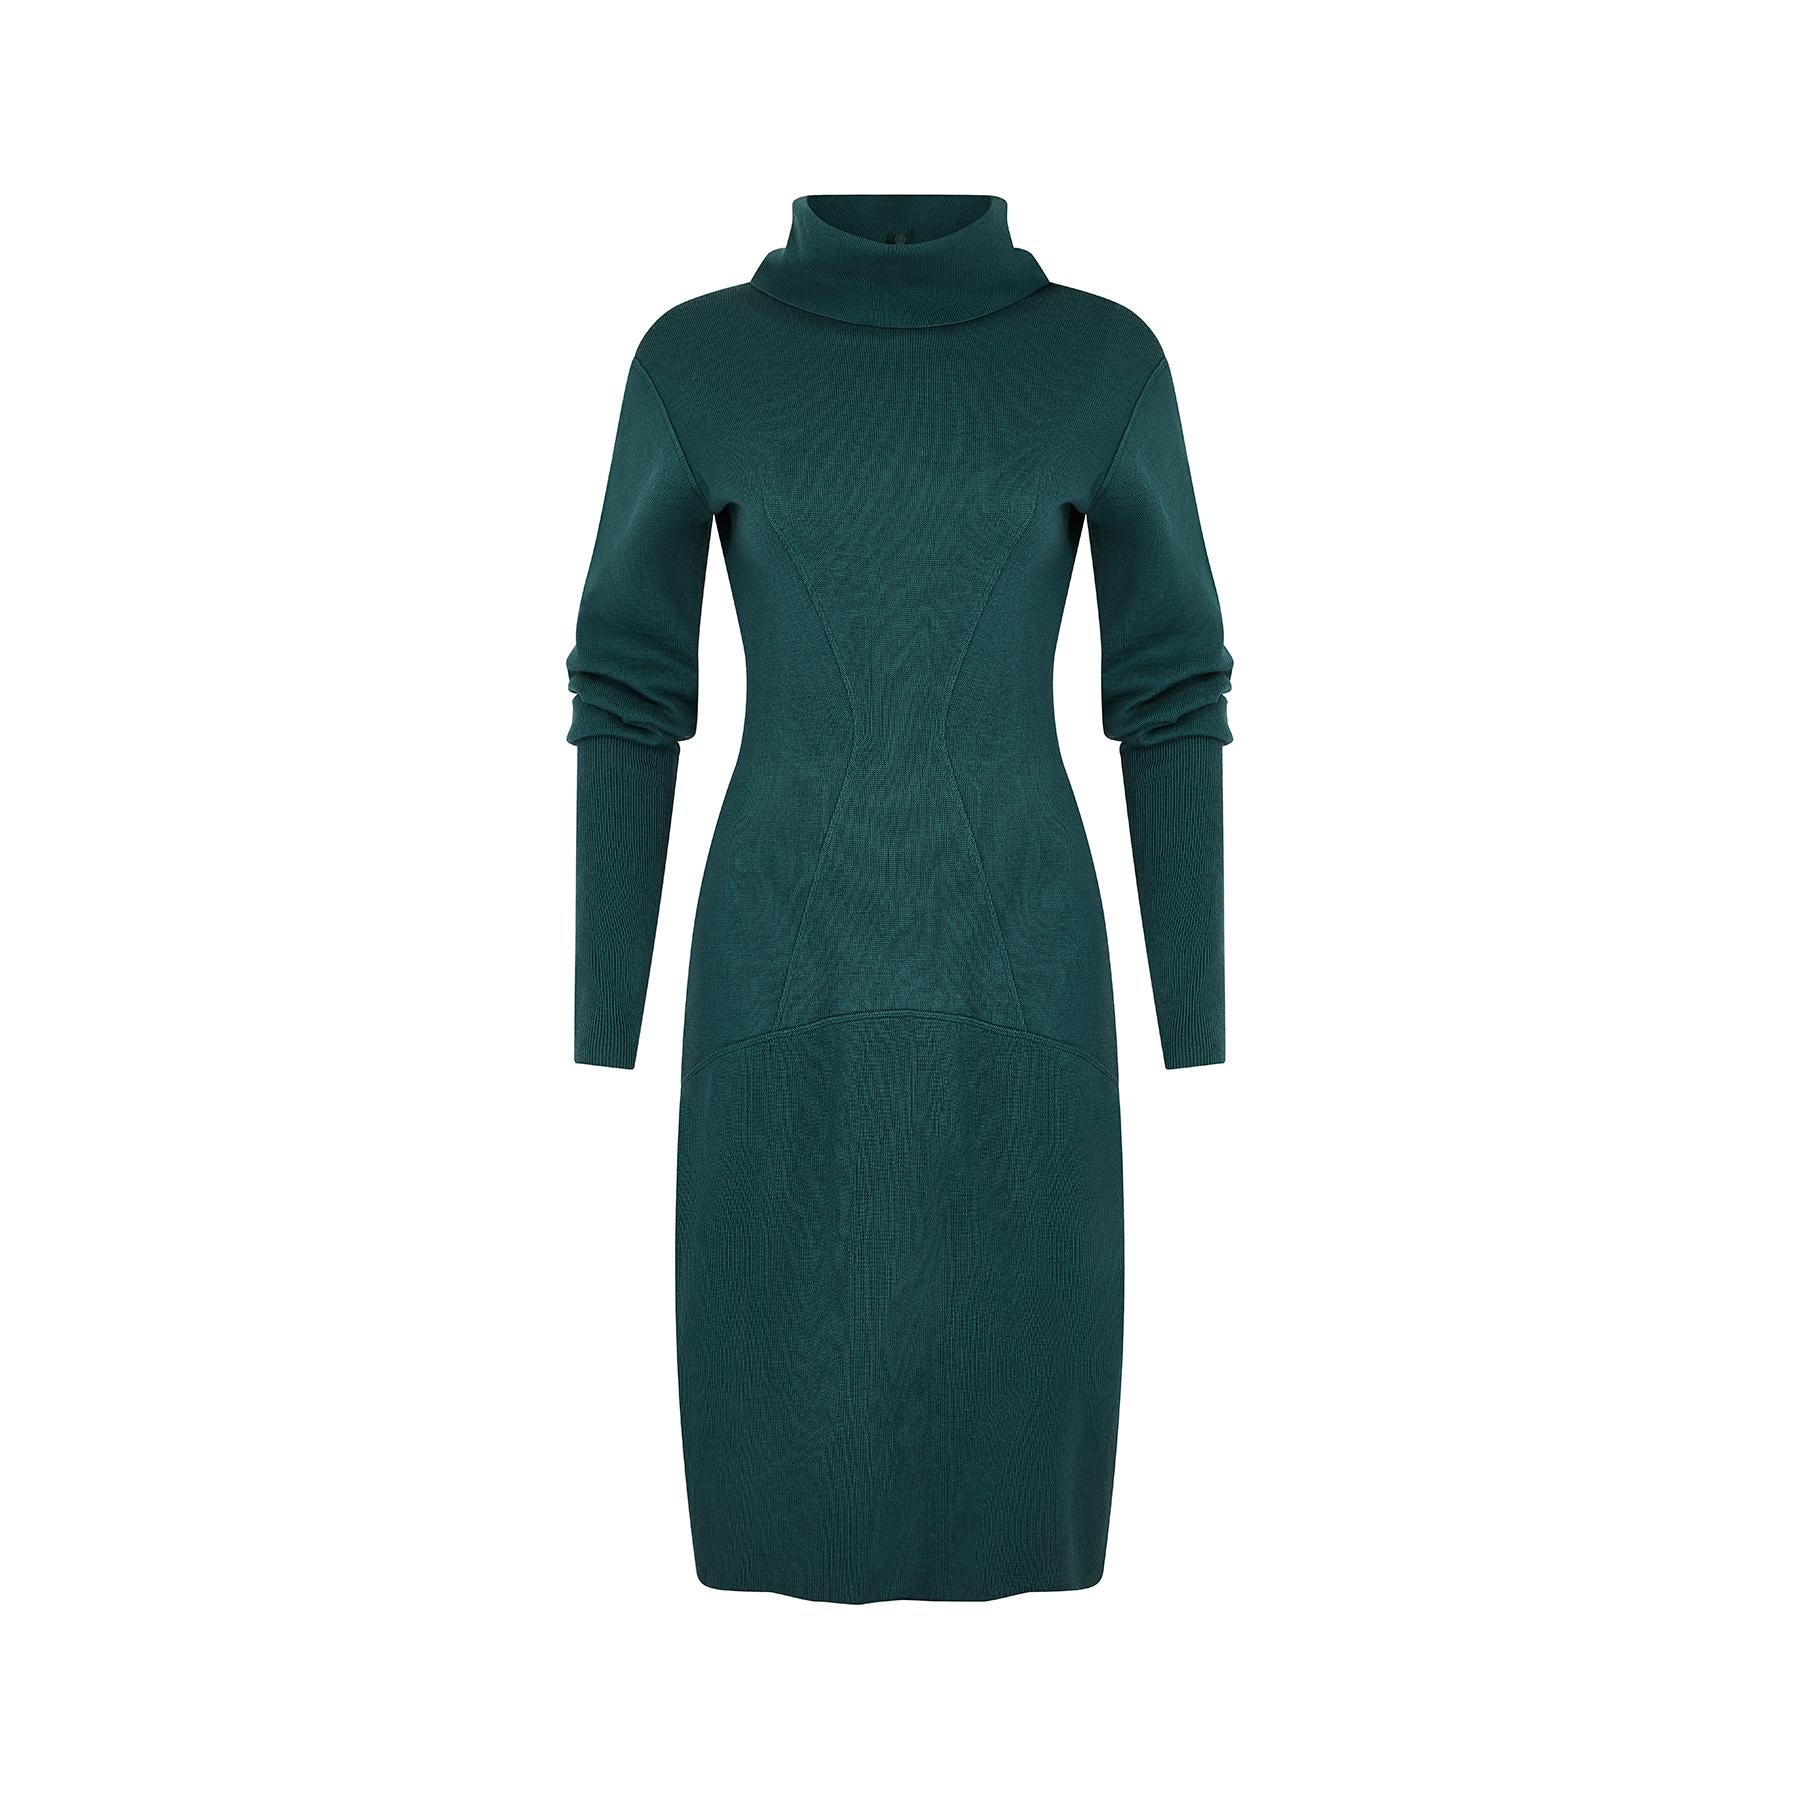 Runway documented knitted bodycon dress by Azzadine Alaia, in a deep teal green shade.  A great example of the bodycon and seamed, fitted designs which became the brand's signature. The material is a medium thick wool, with tapered seams which